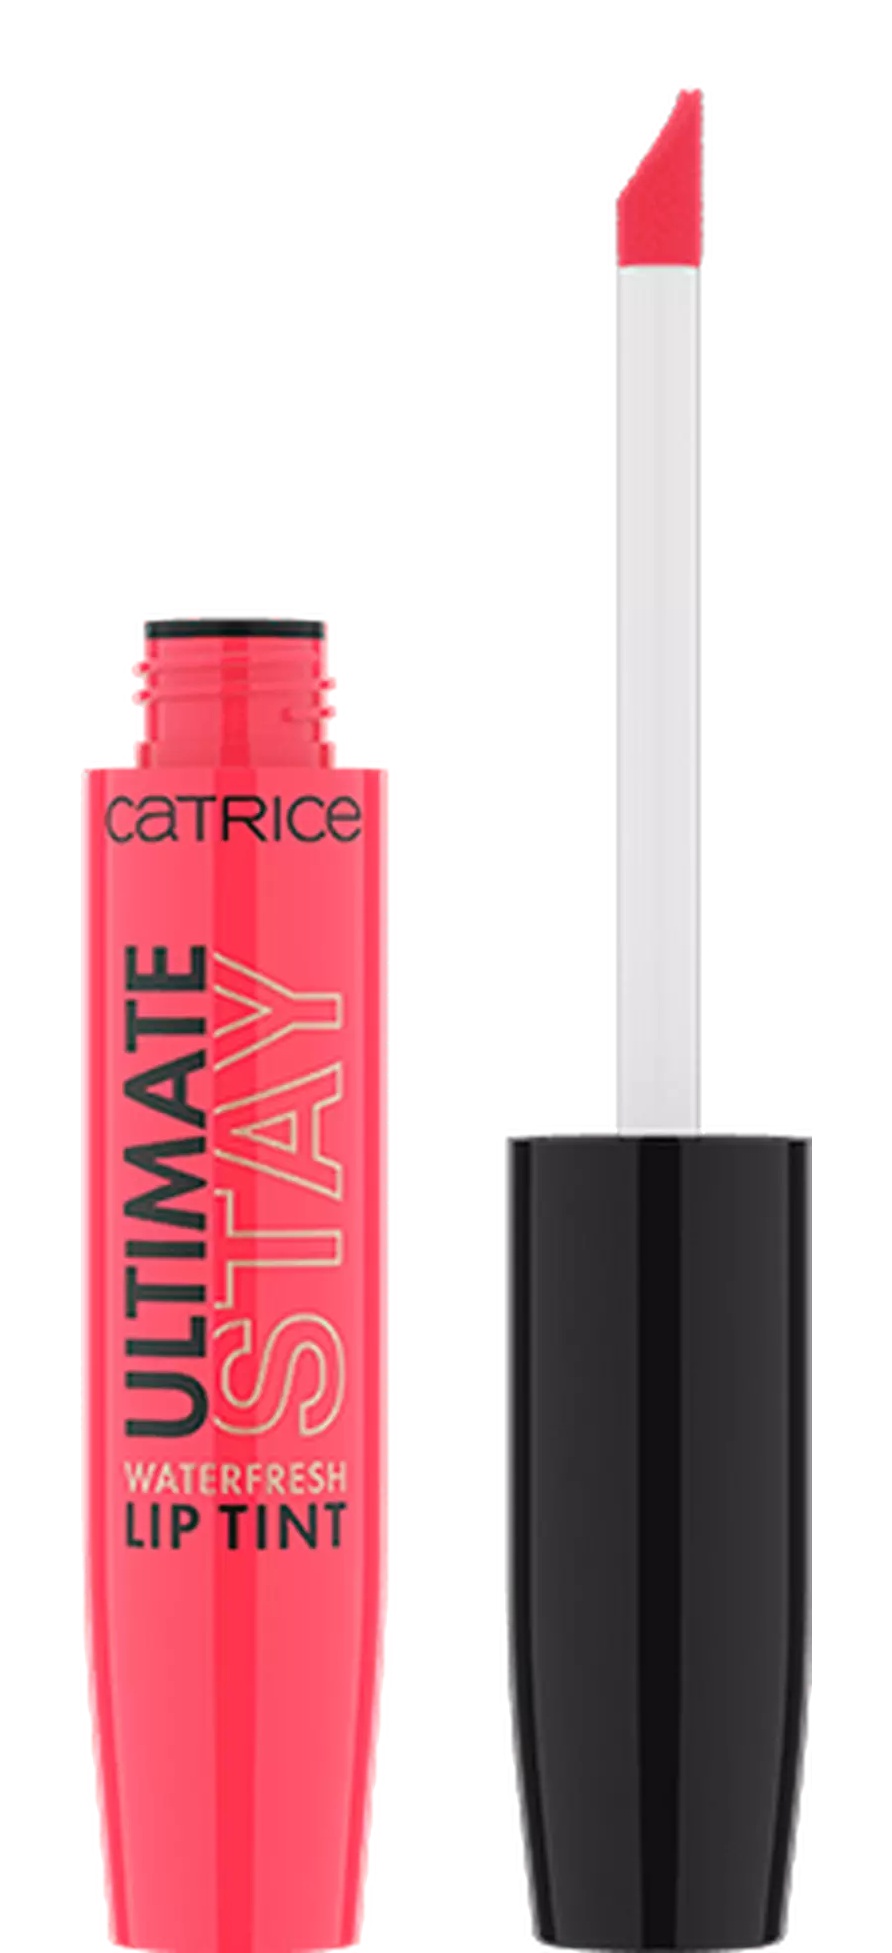 Catrice Ultimate Stay Waterfresh Lip Tint - 030 Never Let You Down